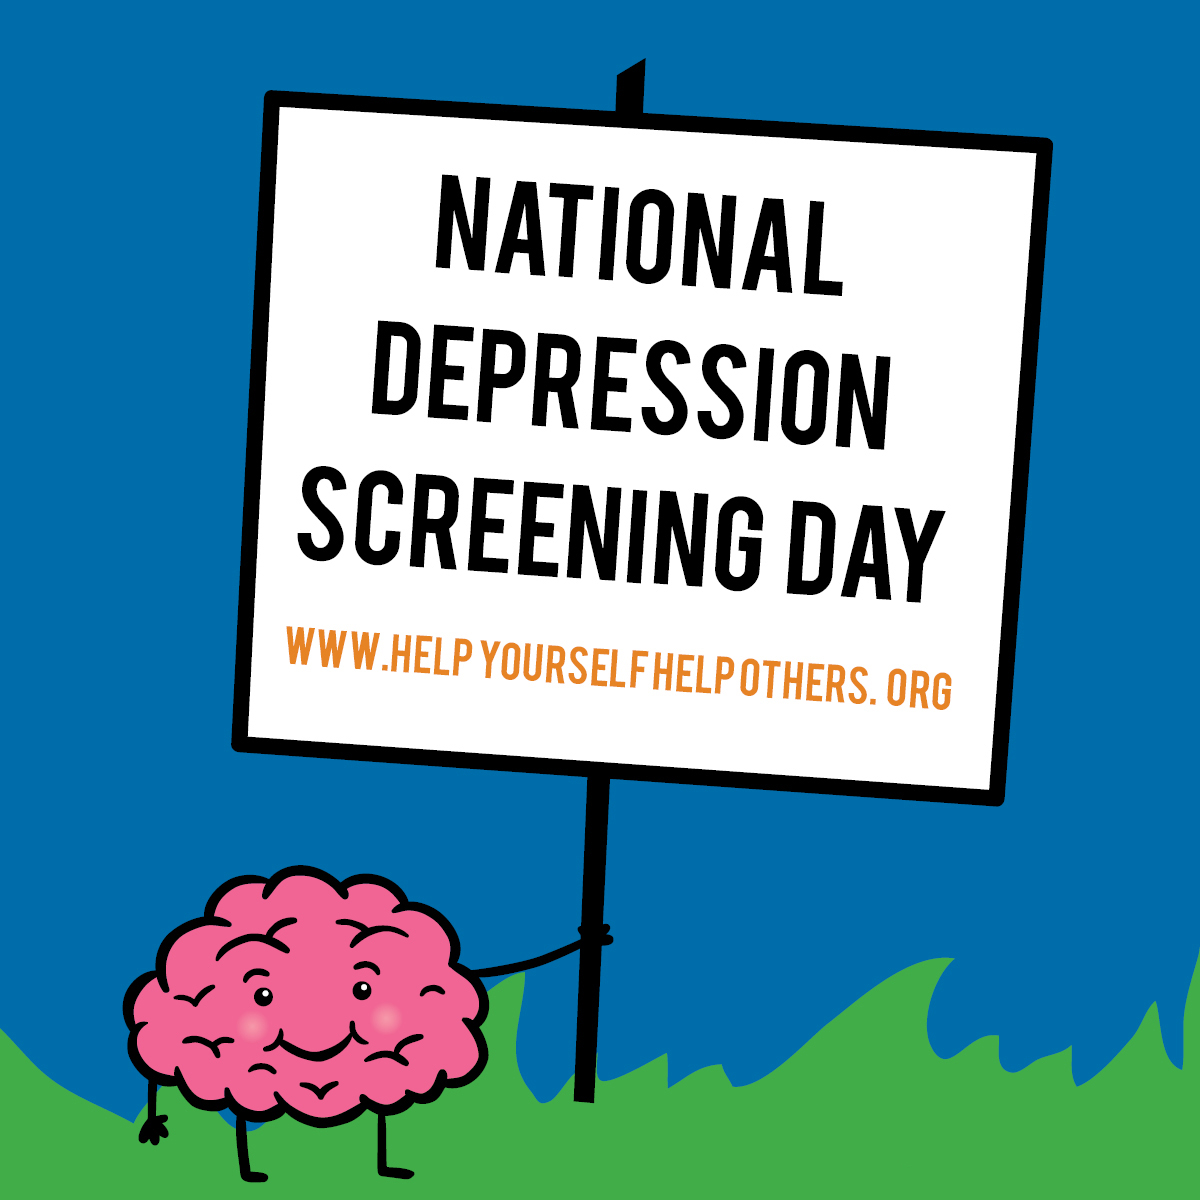 National Depression Screening Day - is an effort to reach individuals across the nation with important mental health education and connect them with support services. #DepressionScreeningDay